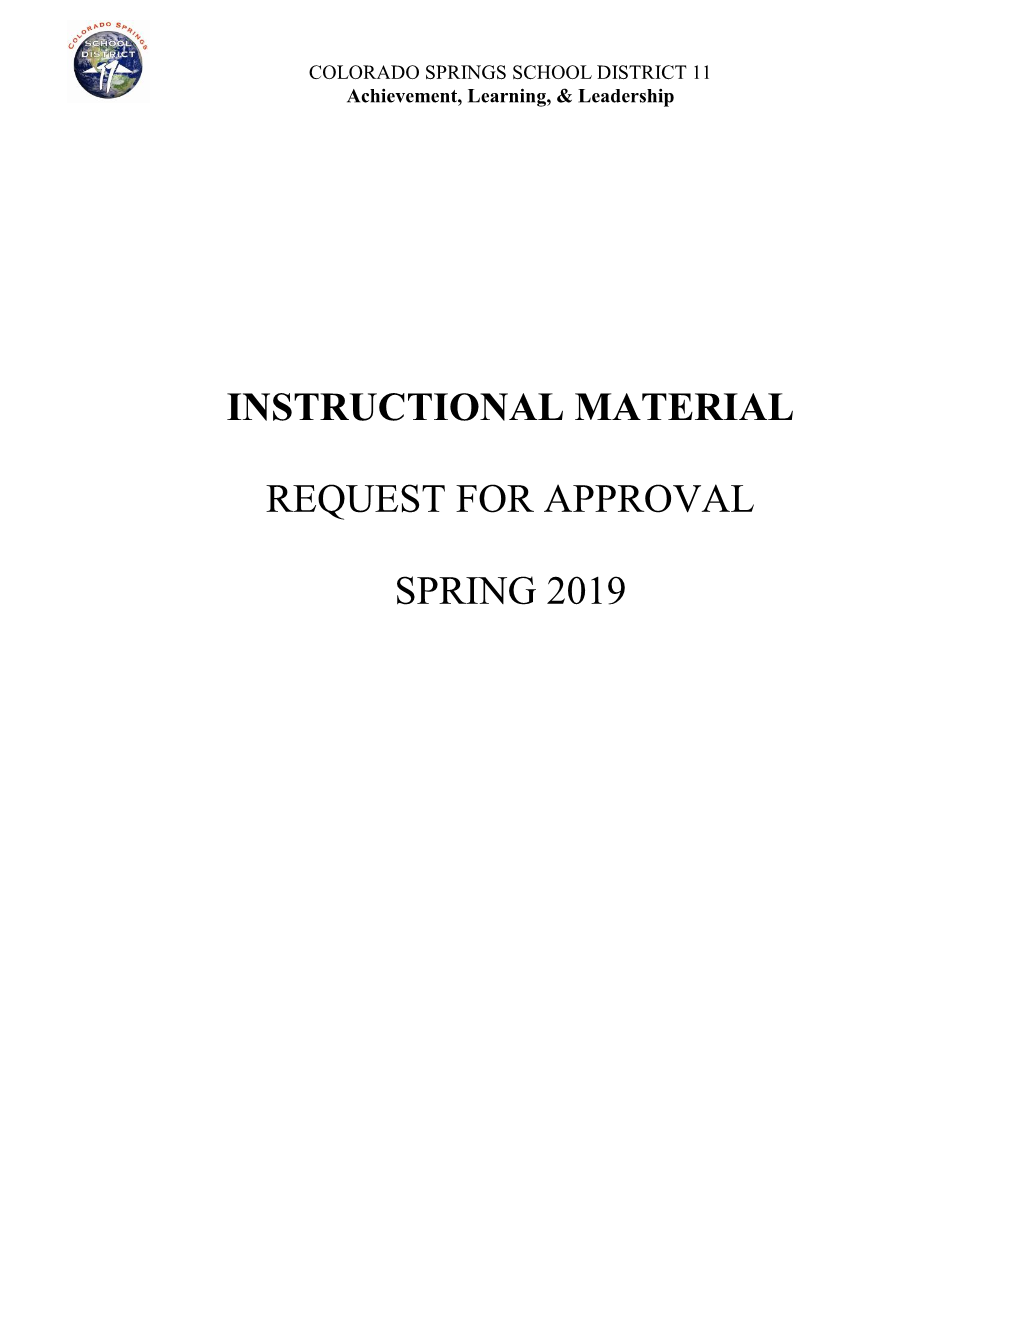 Instructional Material Request for Approval